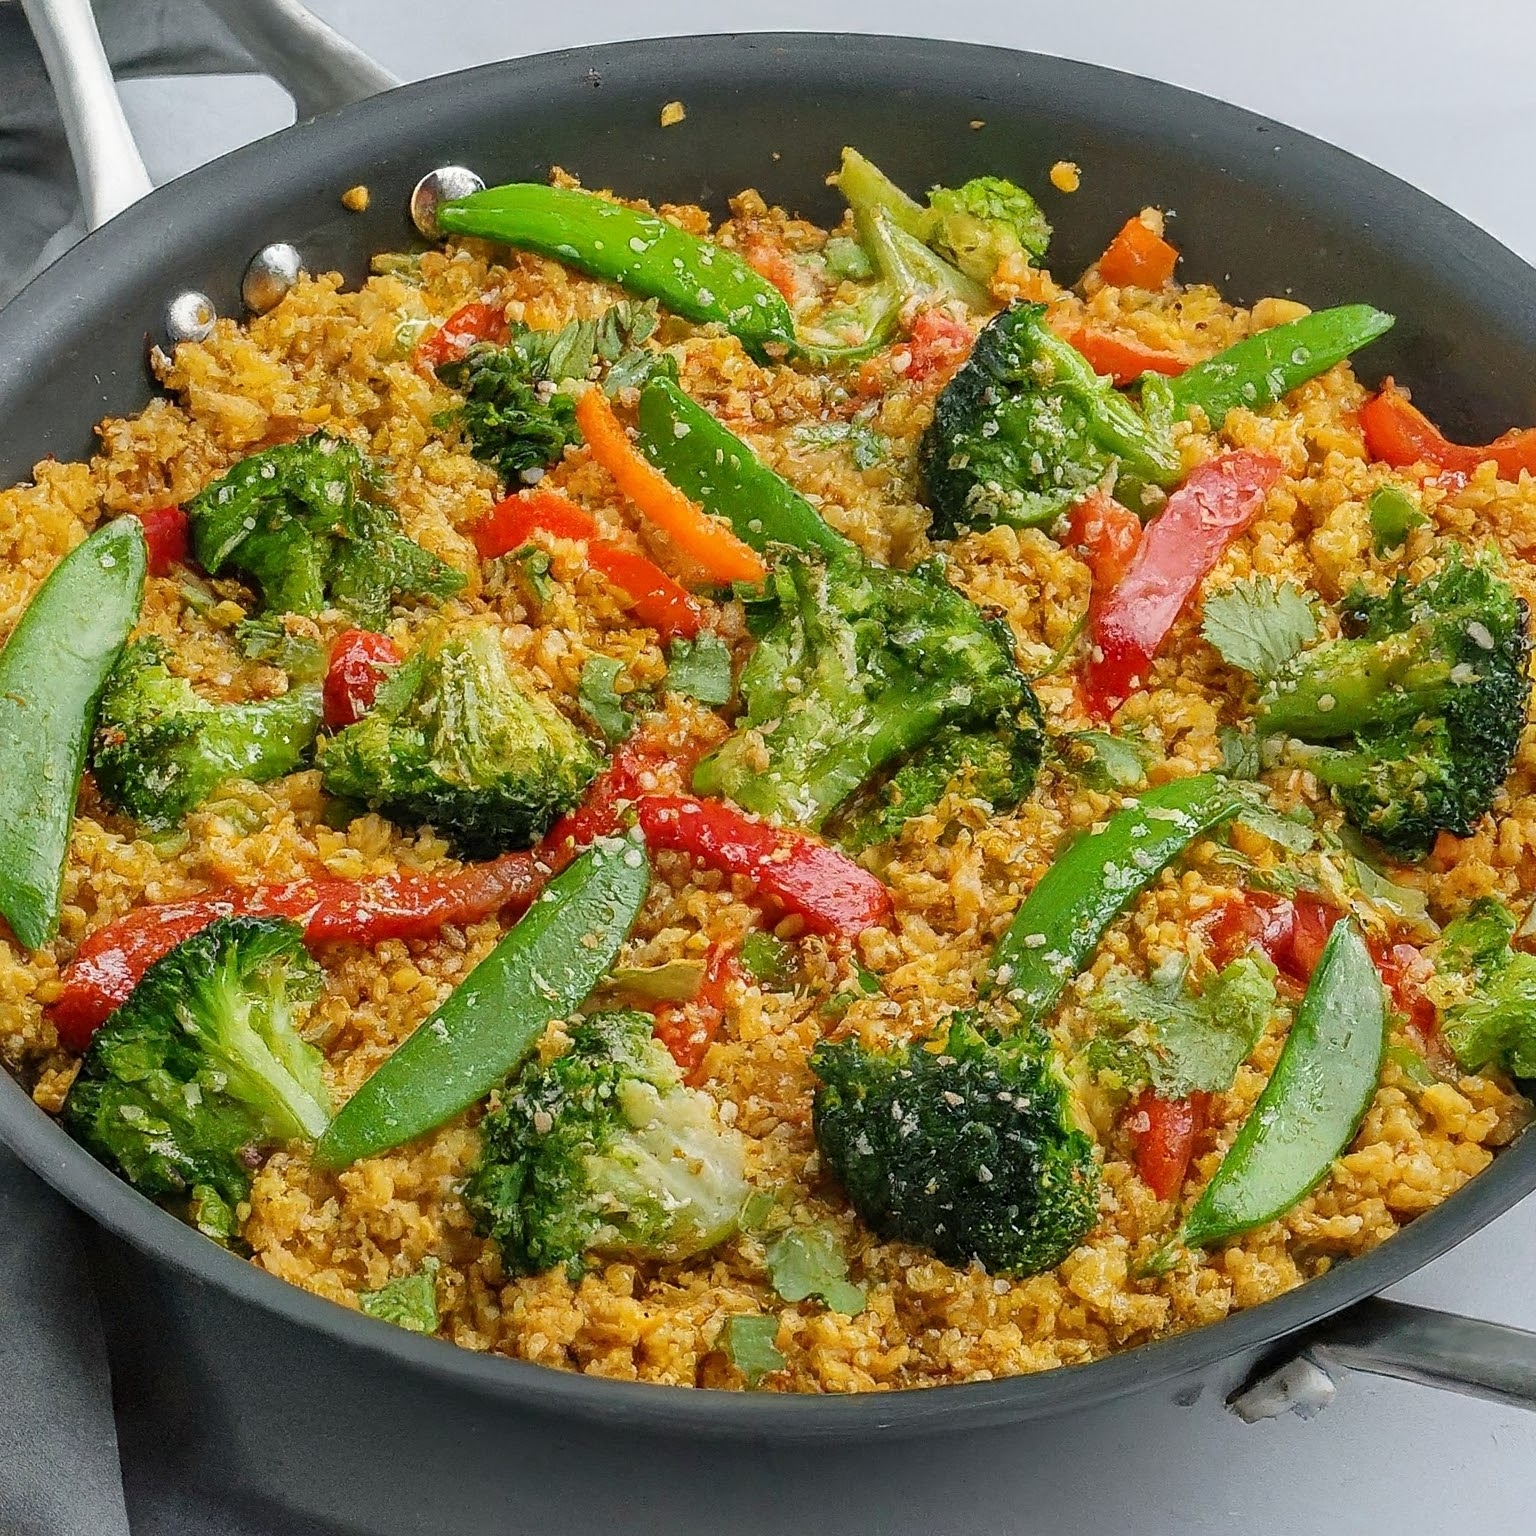 Filled with Sweet and Spicy Millet Stir-Fry with colourful vegetables, a sweet and spicy sauce, and sesame seeds.